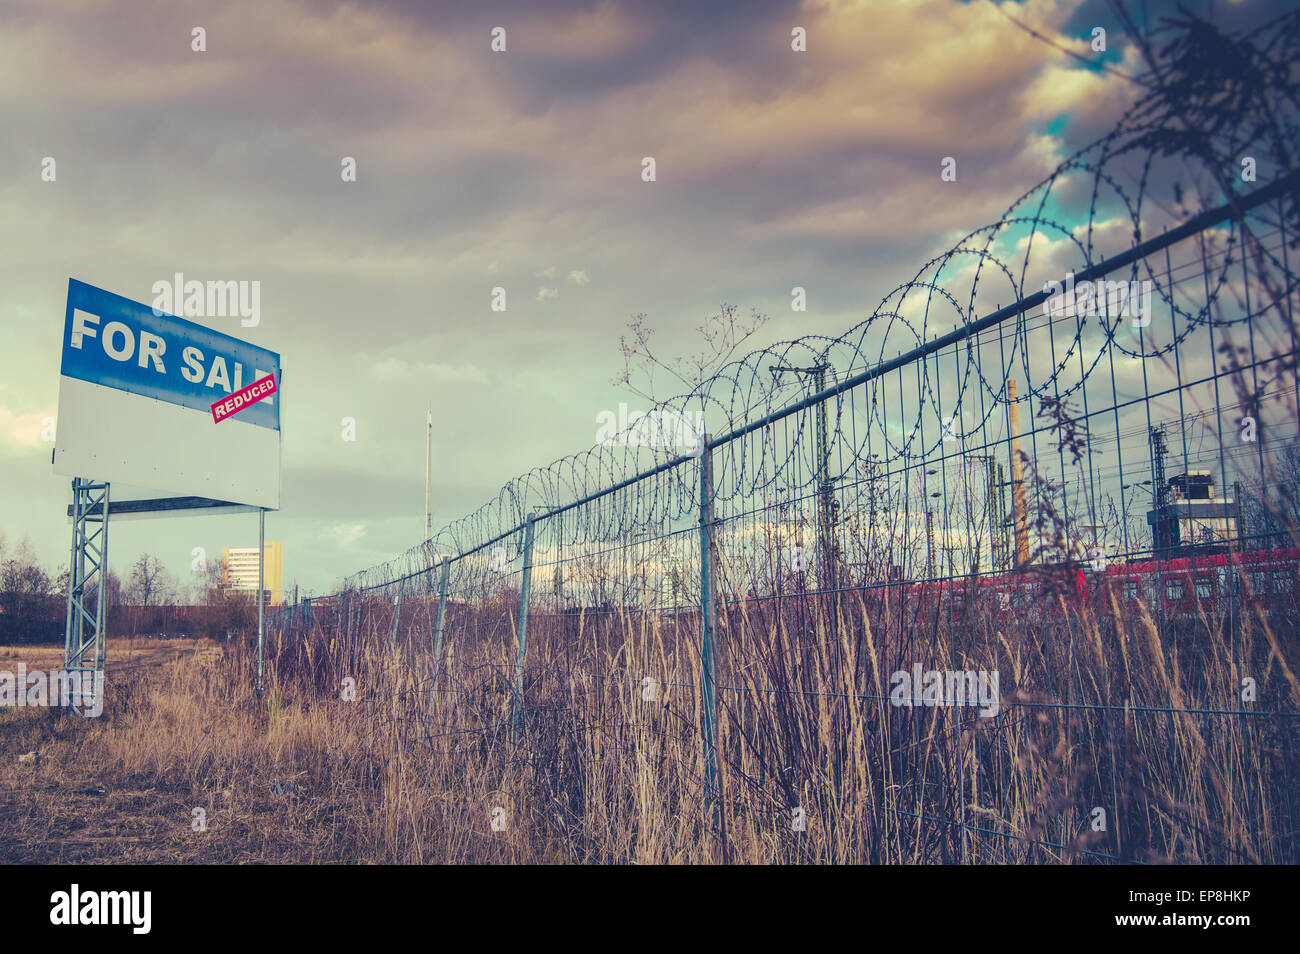 A For Sale Billboard Sign In An Urban Industrial Wasteland Or Vacant Lot Stock Photo